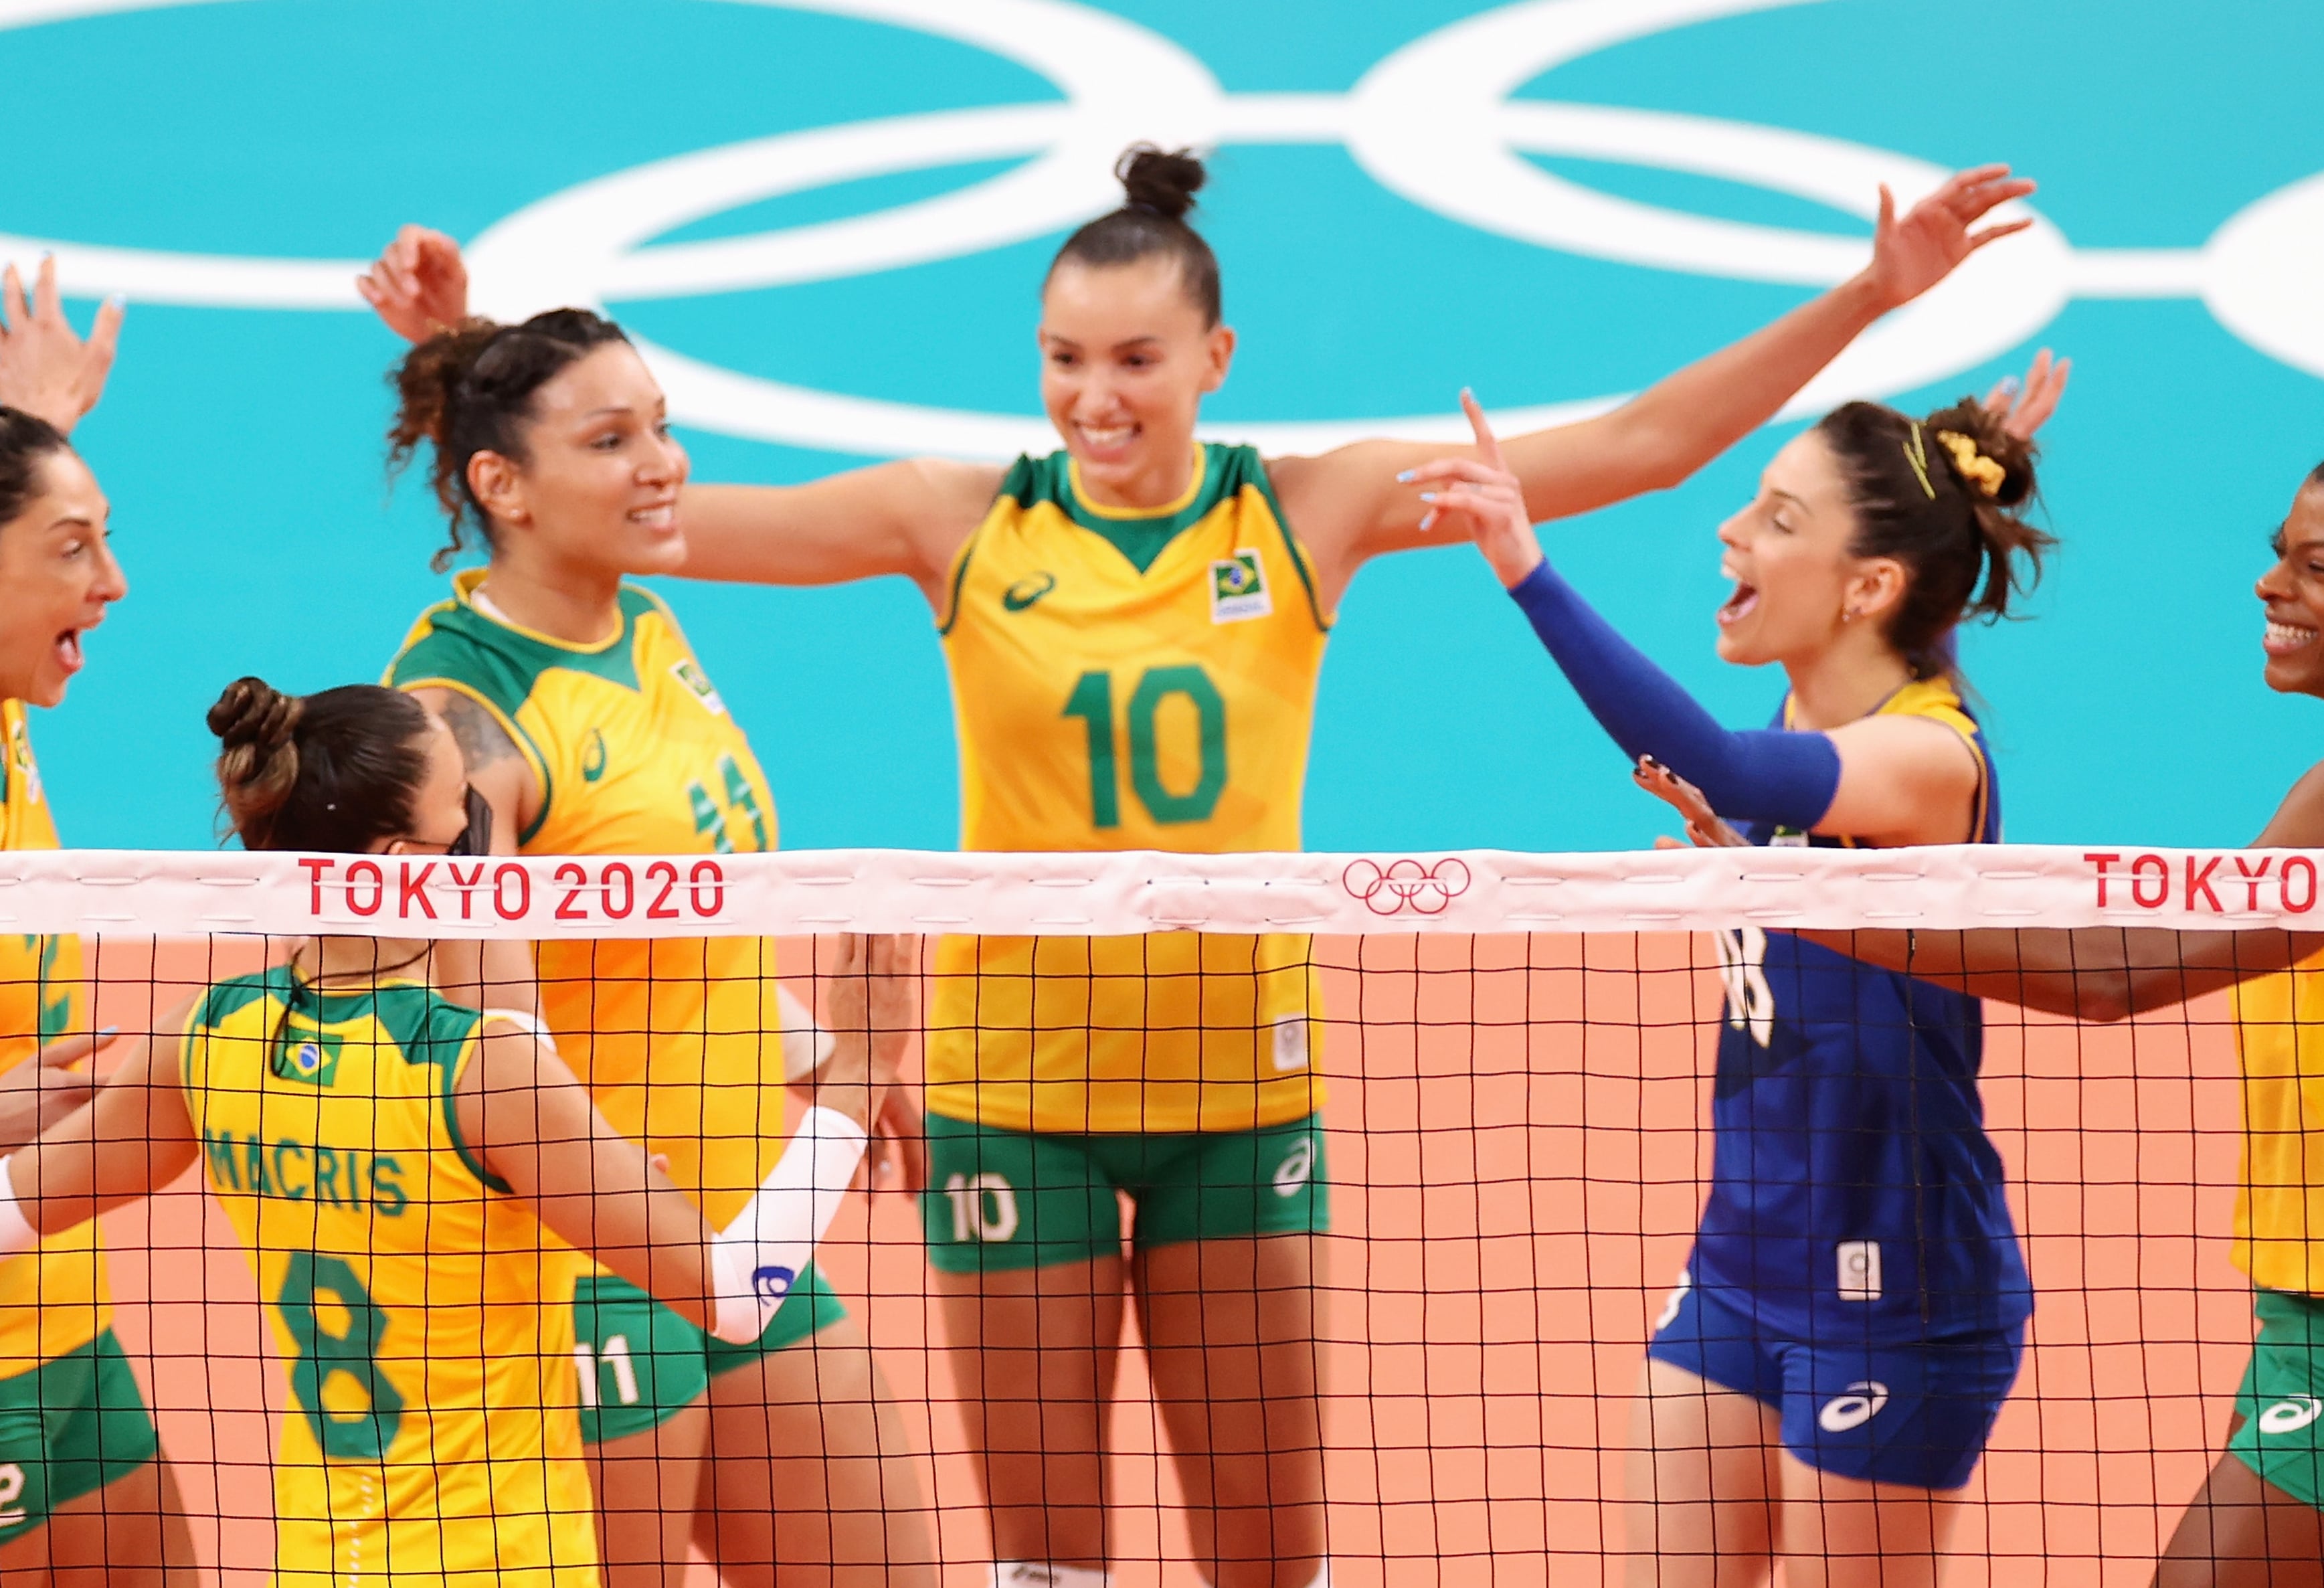 Why 1 Volleyball Player Wears a Different Colored Jersey | POPSUGAR Fitness